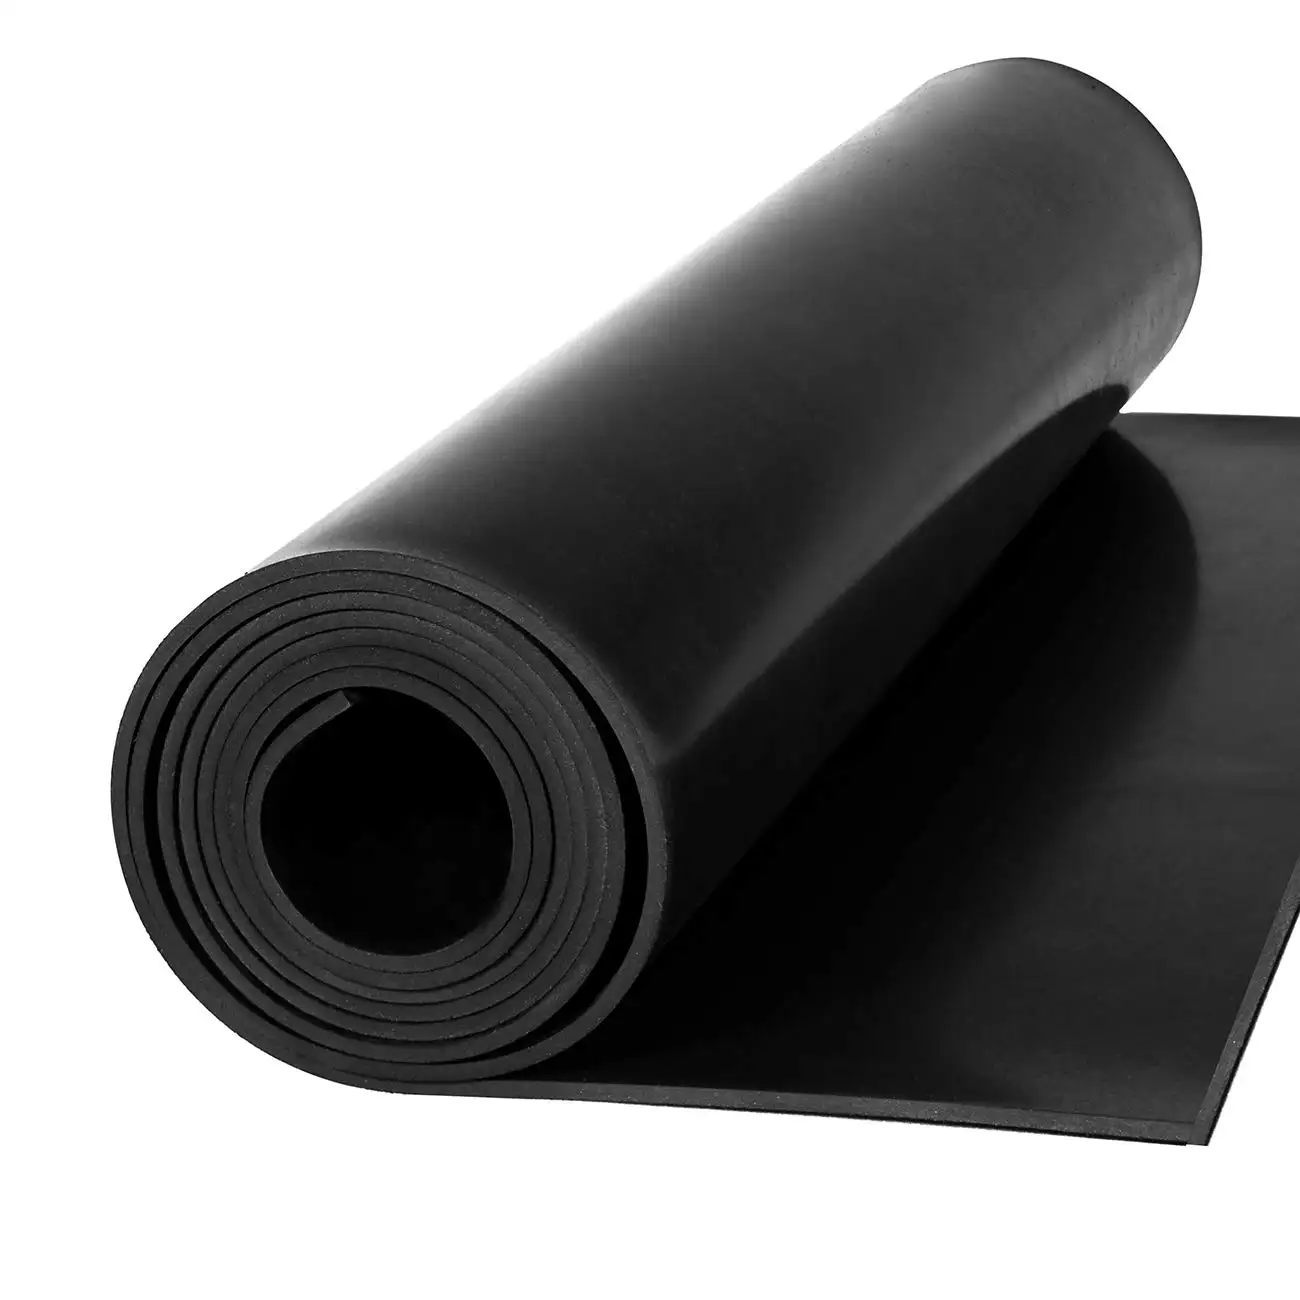 Rubber strip 6mm Neoprene Rubber Sheet, Solid Rubber Sheets, Rolls & Strips for DIY Gaskets, Crafts, Pads, Flooring, Protection